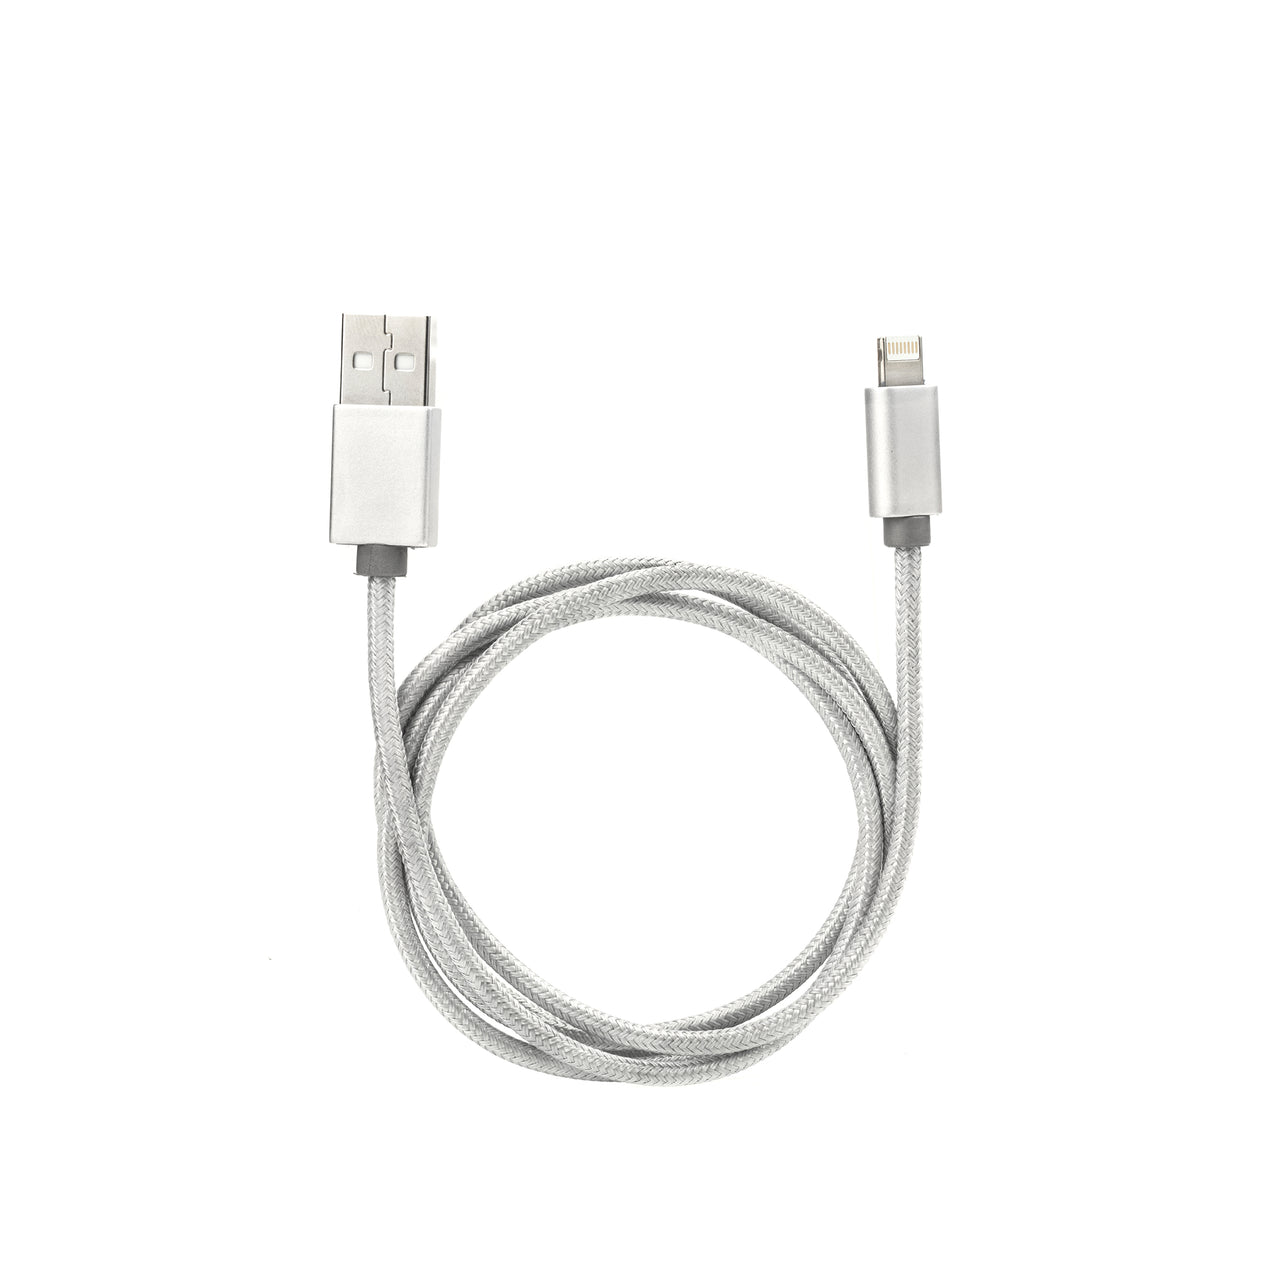 Super Cable 2-n-1 Silver